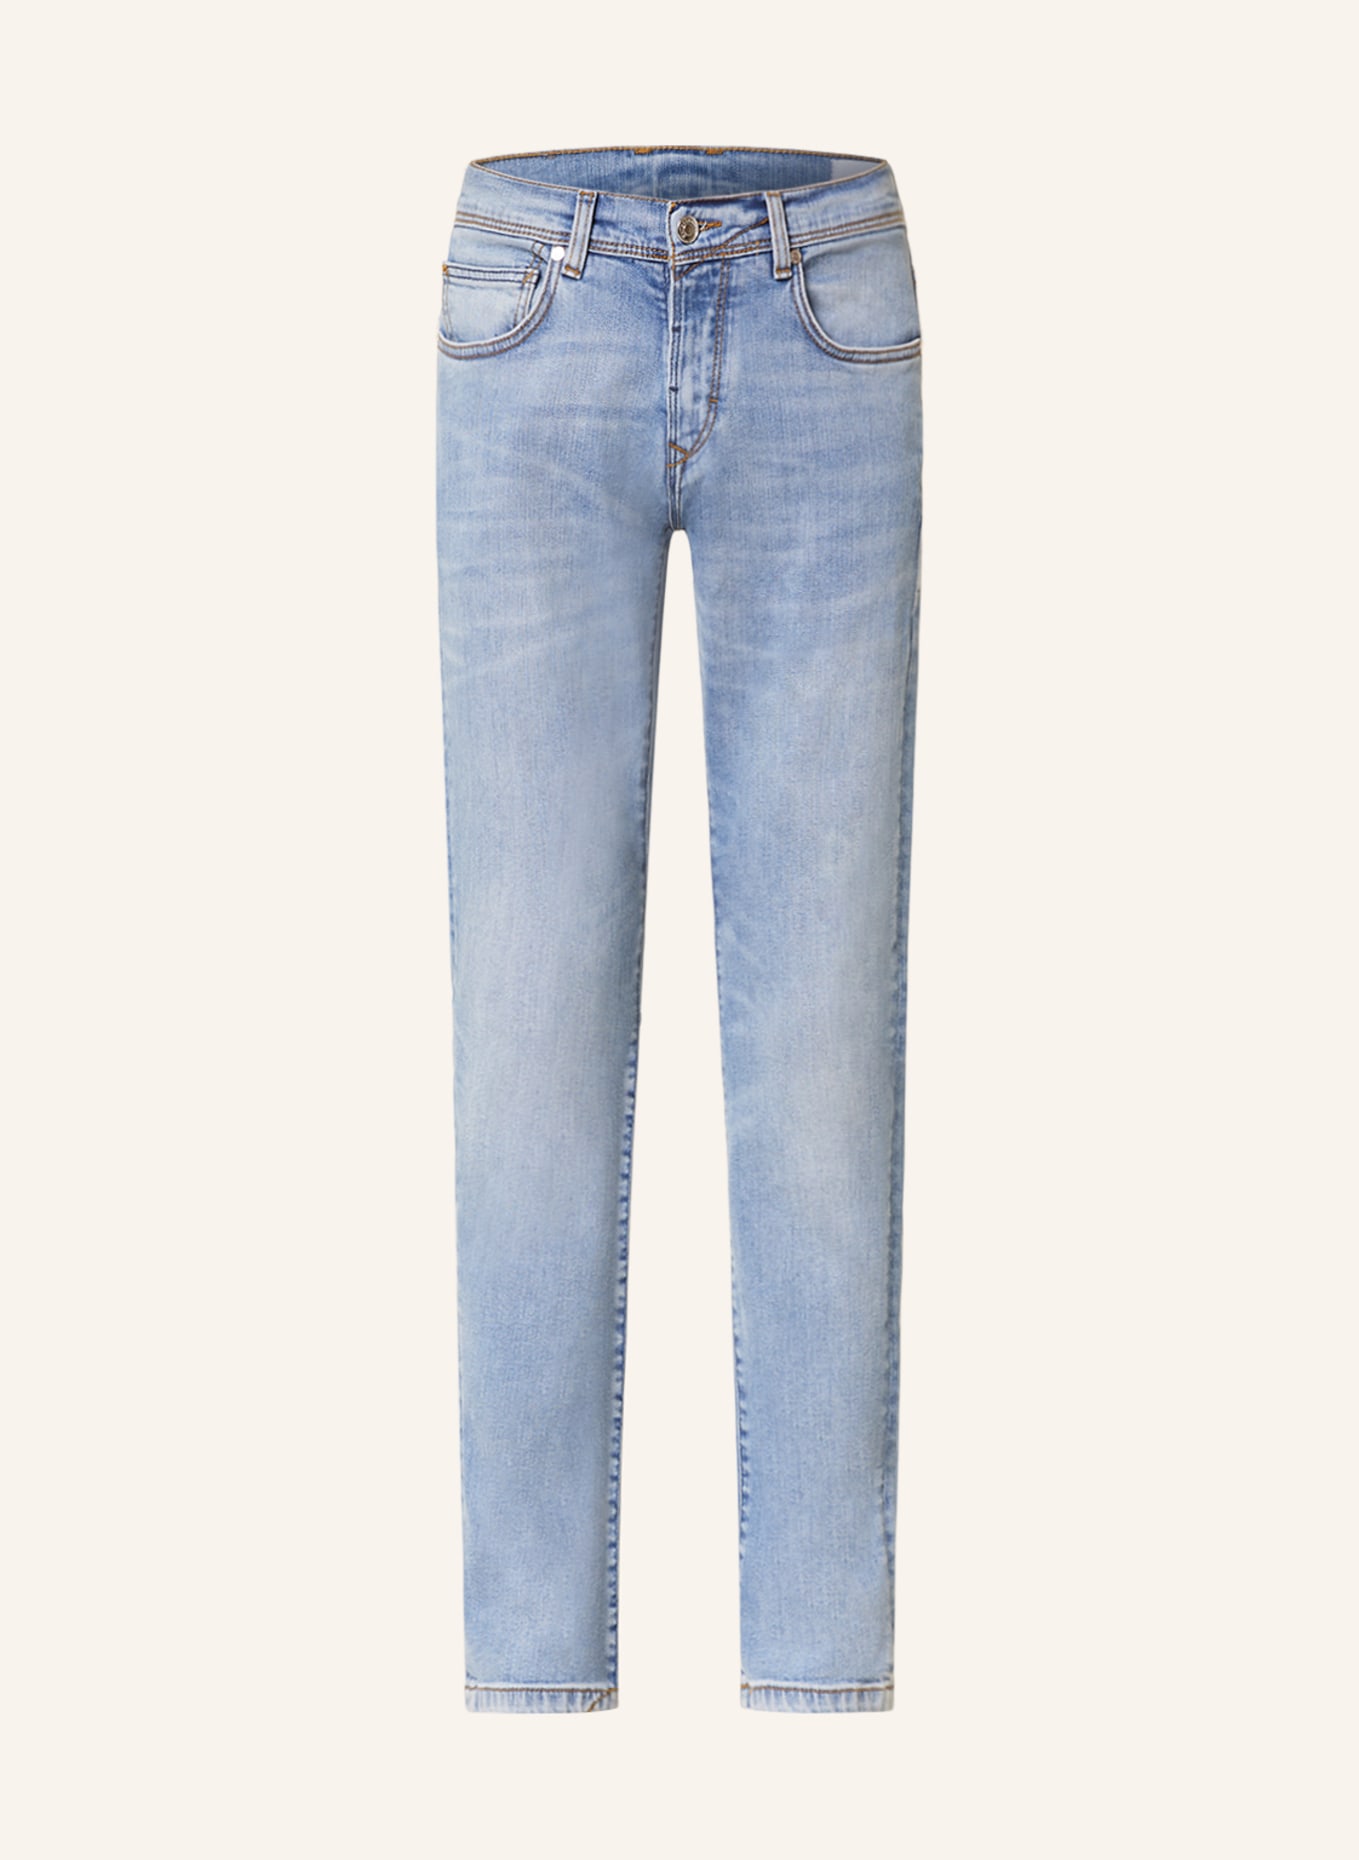 BALDESSARINI Jeans tapered fit, Color: 6846 light blue used mustache (Image 1)